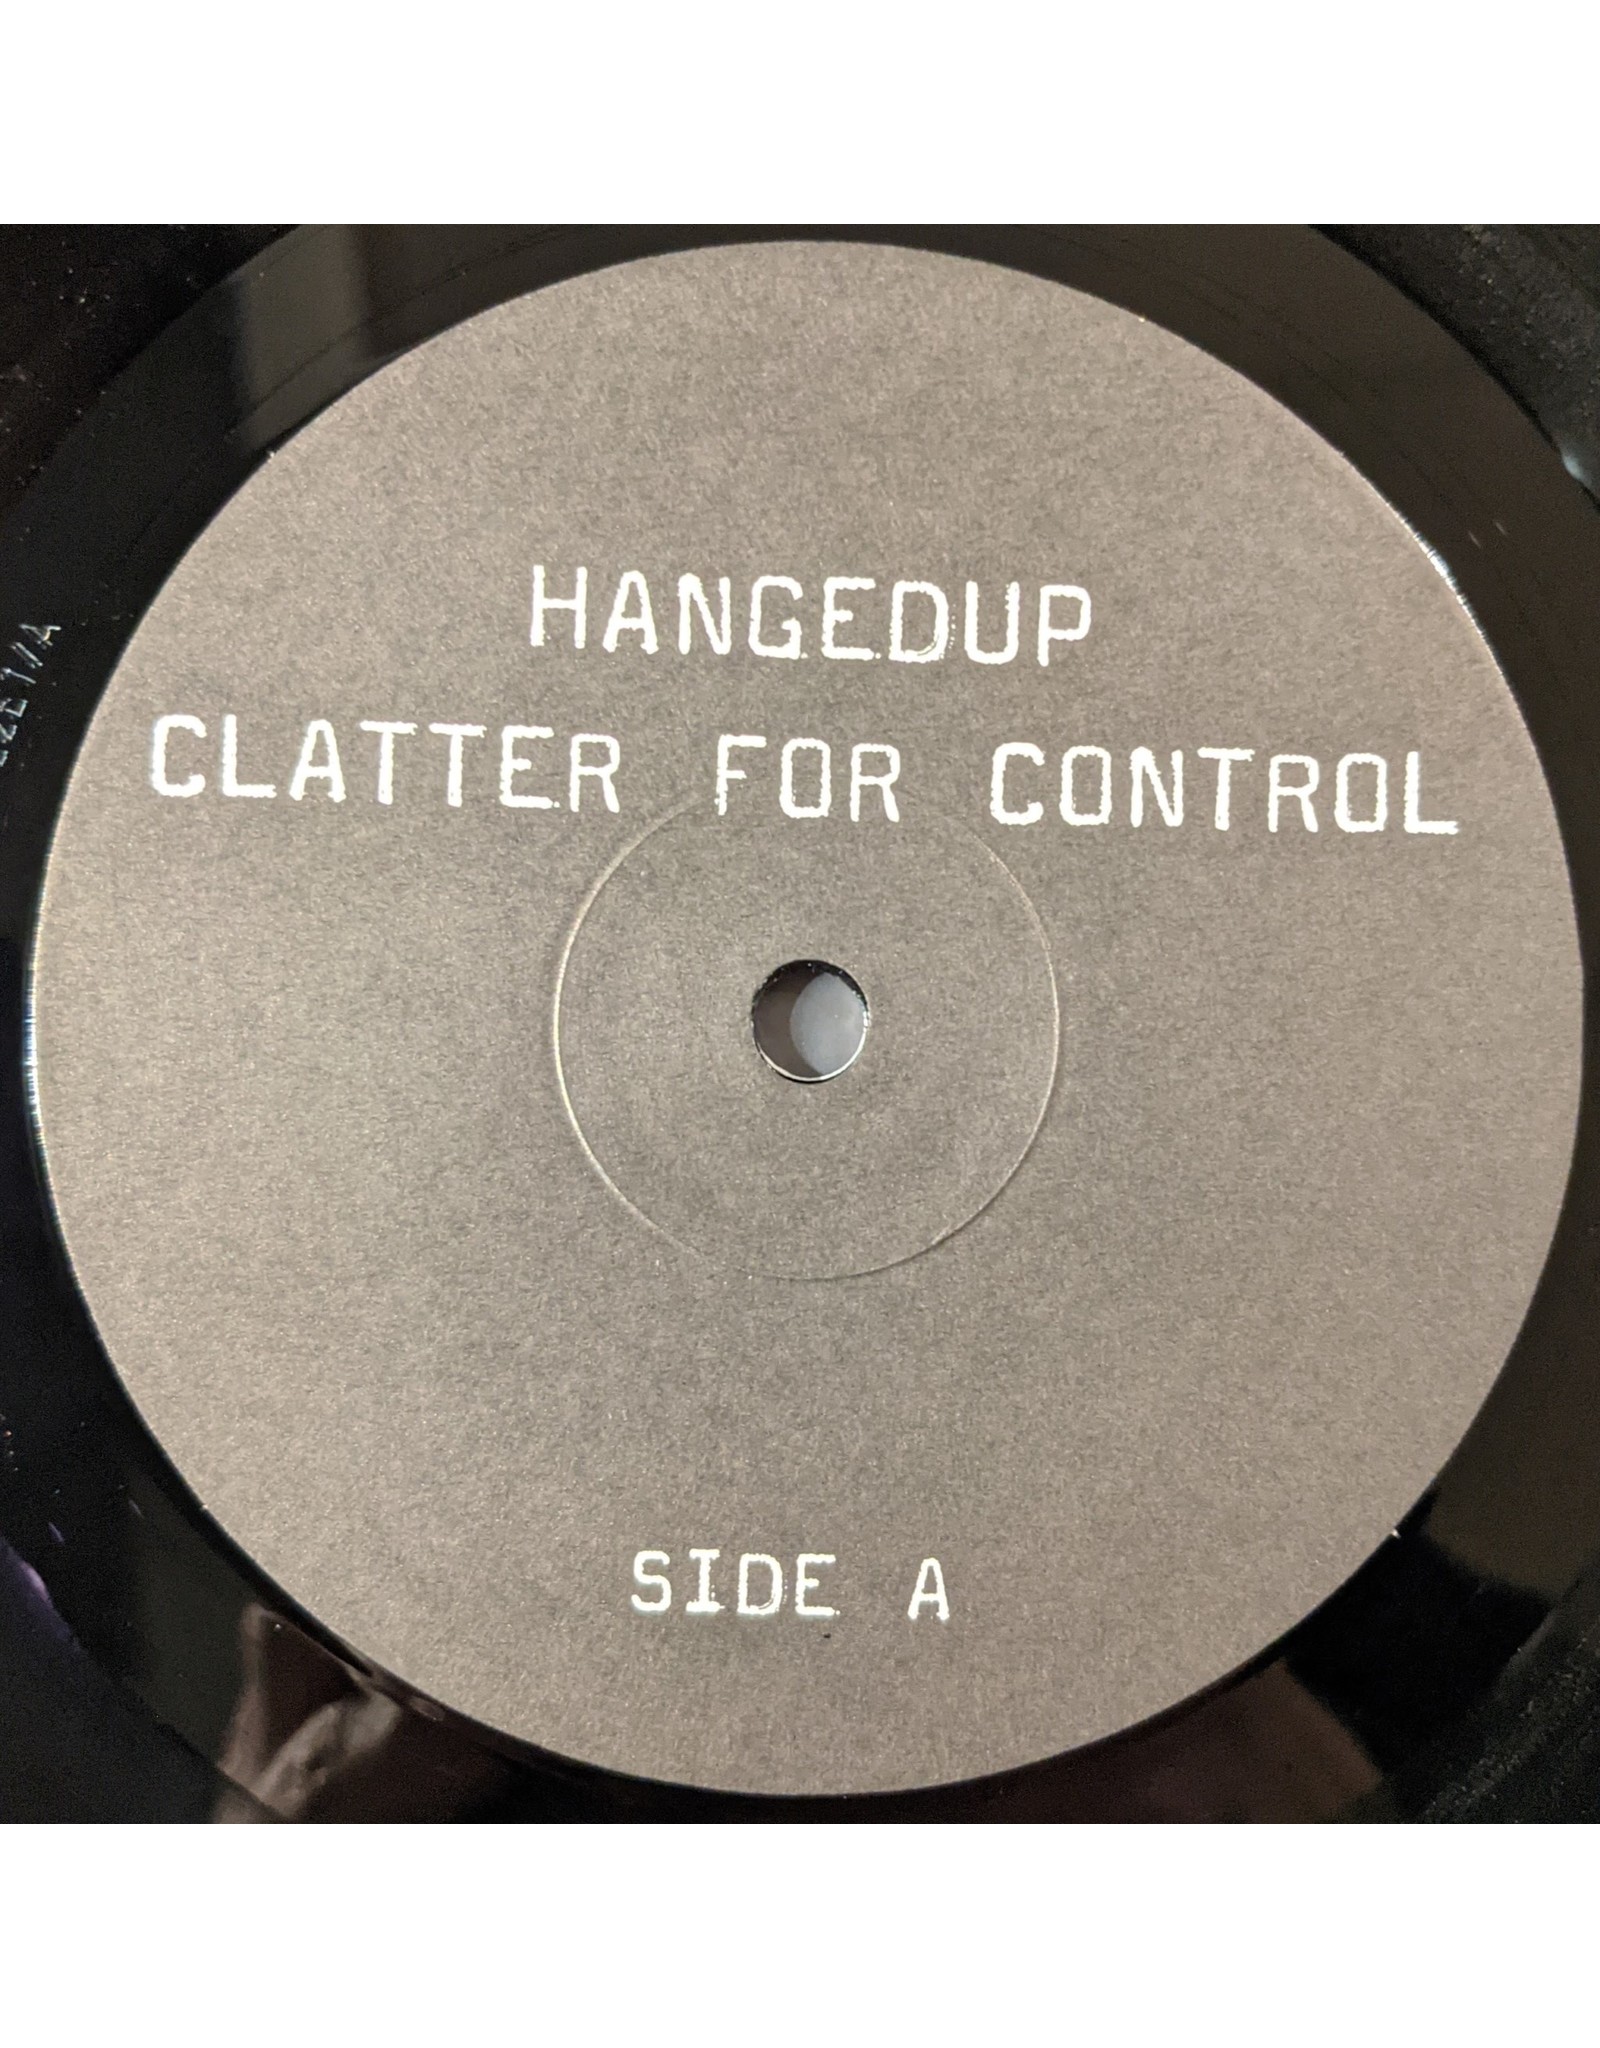 USED: Hangedup: Clatter for Control LP